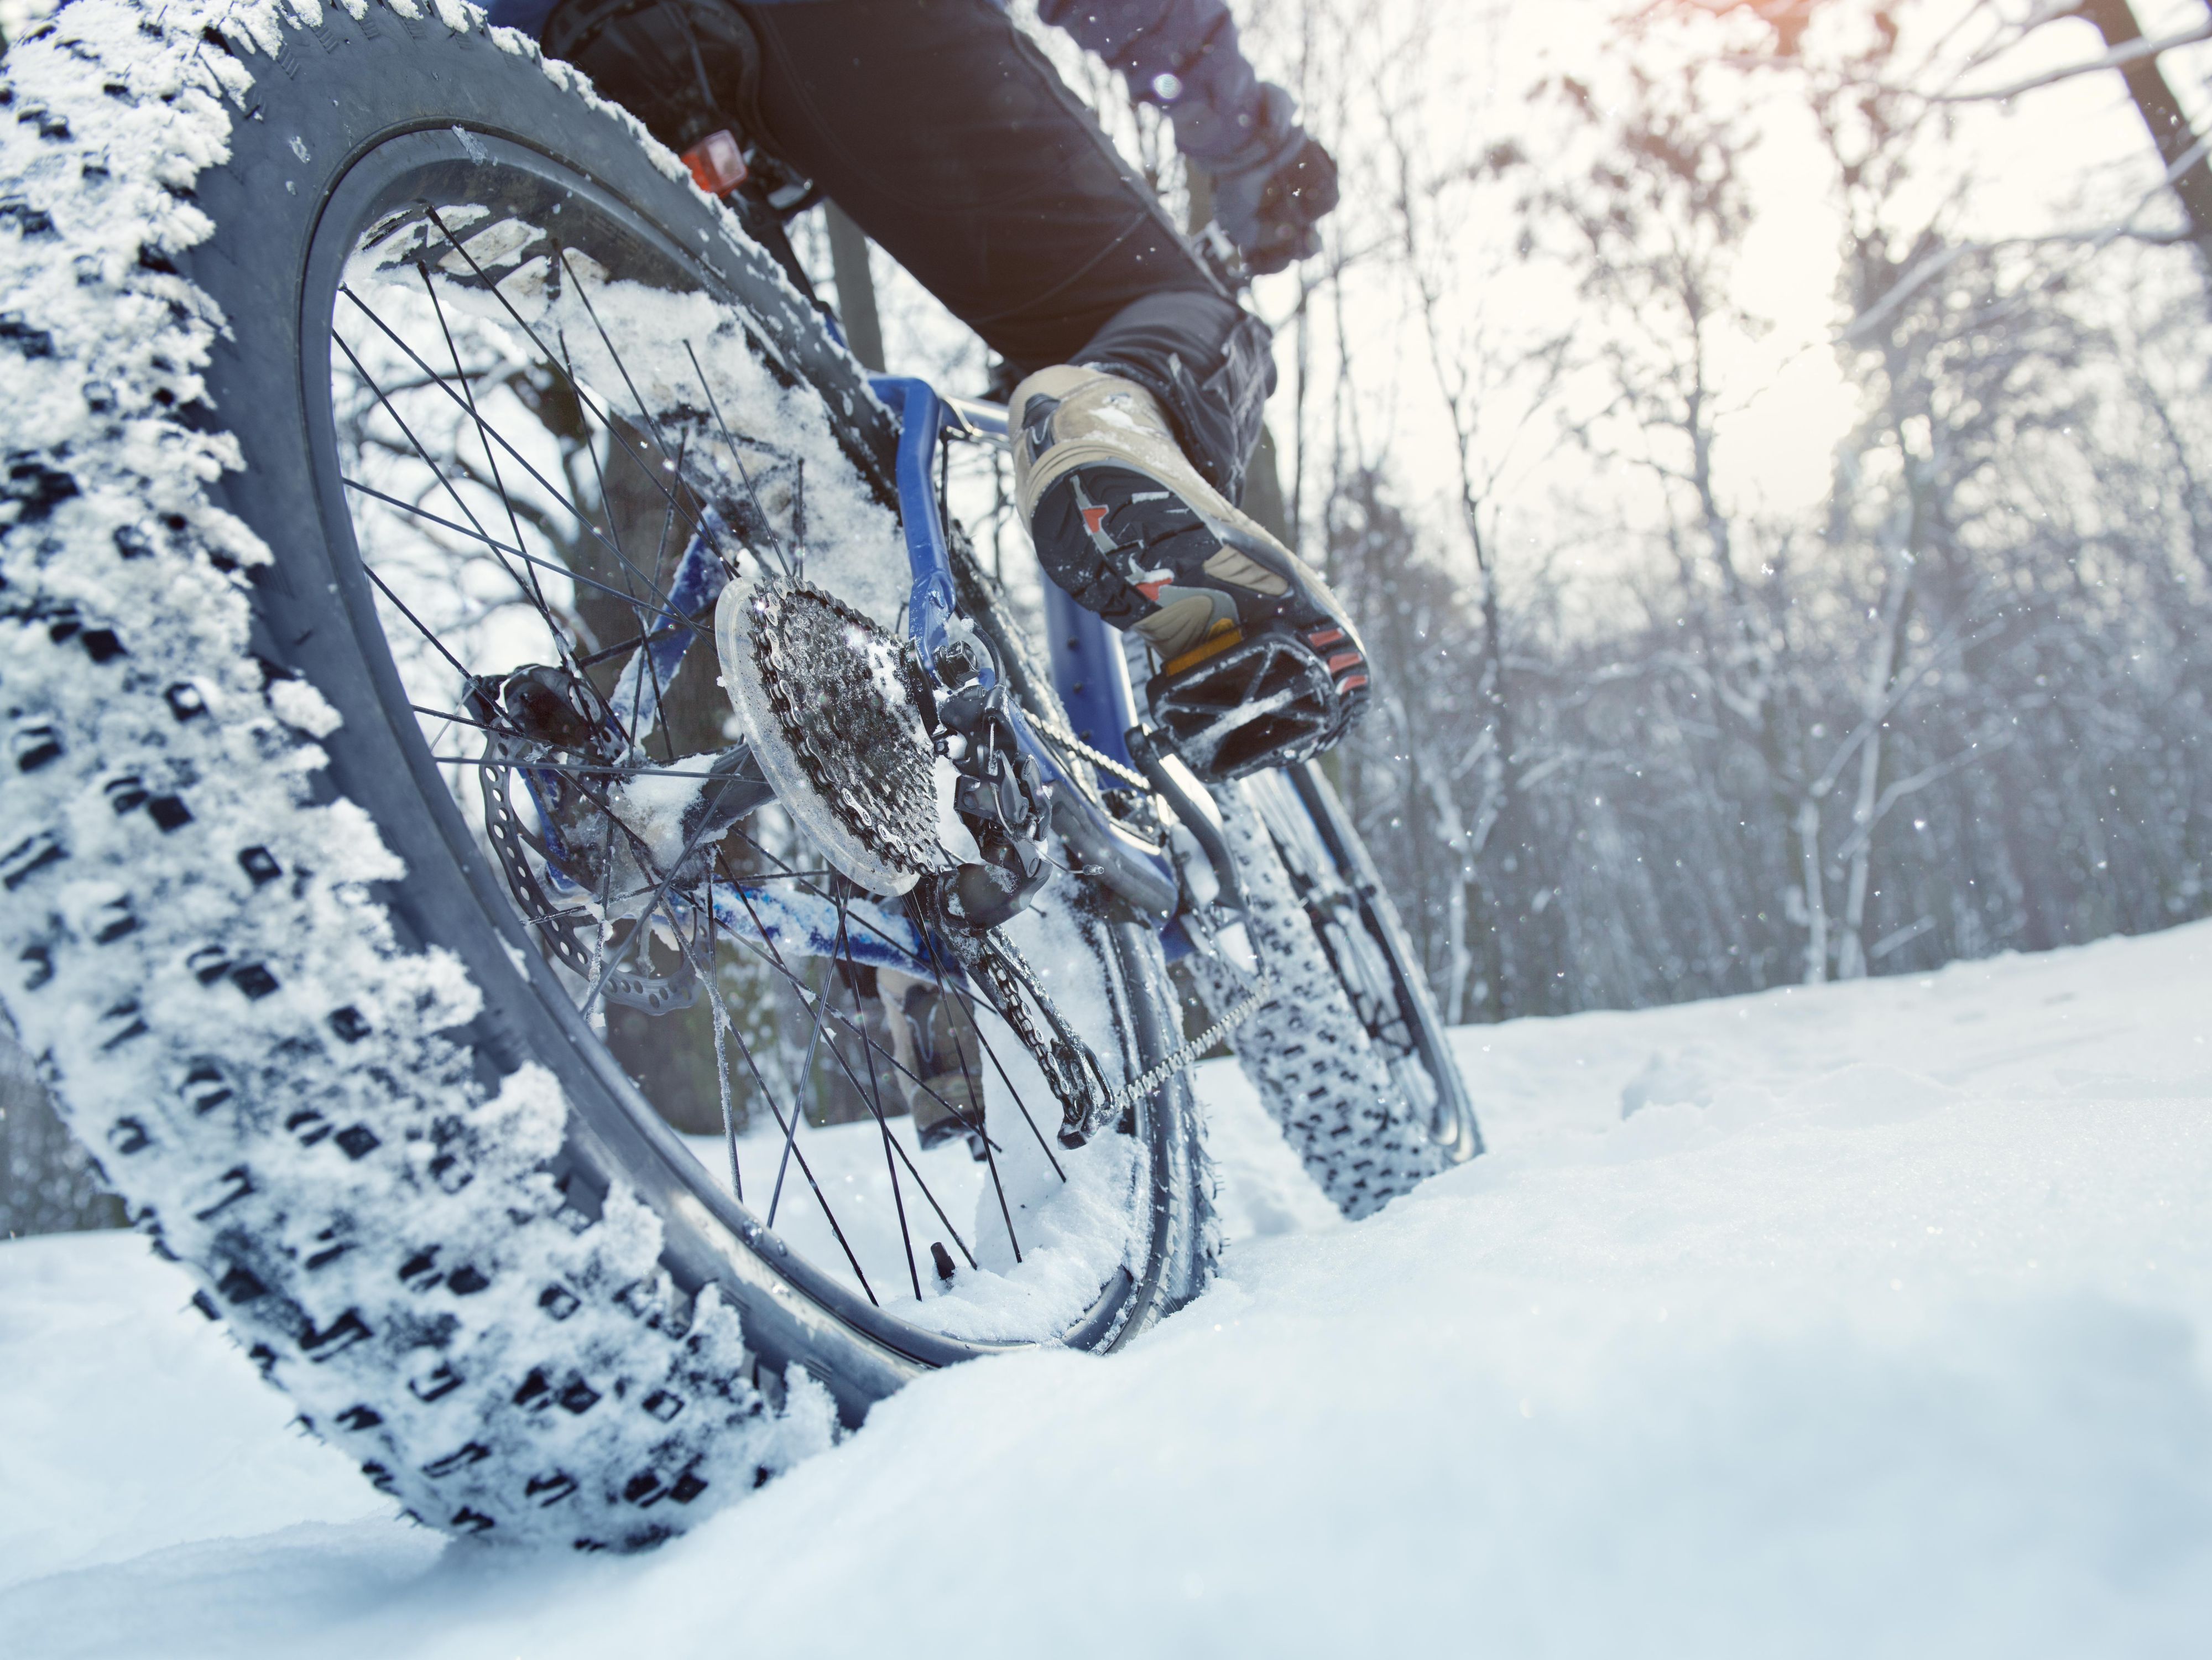  Fat tire biking in the Upper Peninsula offers adventure and stunning winter views in the hub of the Midwest with over 60 miles of trails. Don’t wait until spring to get back in the saddle and come visit us at our Marquette Holiday Inn and give snow biking a try.